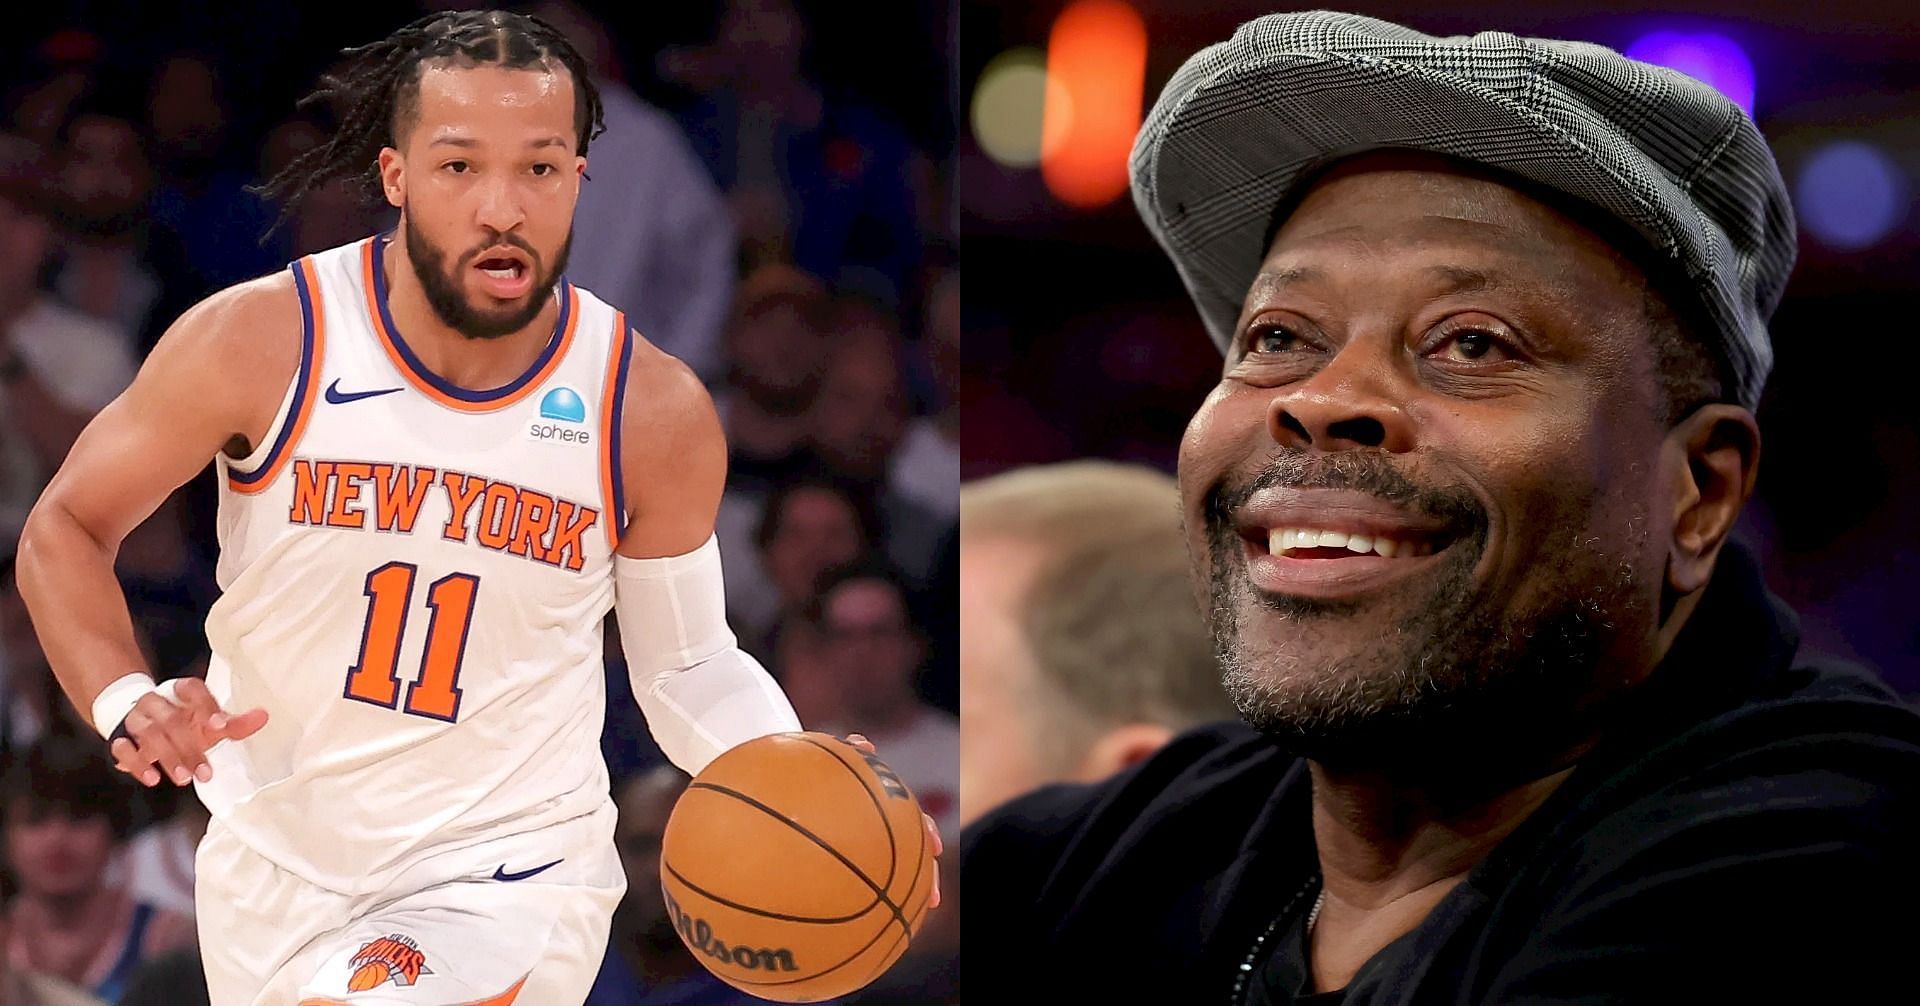 Patrick Ewing breaks silence on Jalen Brunson&rsquo;s hype for greatest player in Knicks history